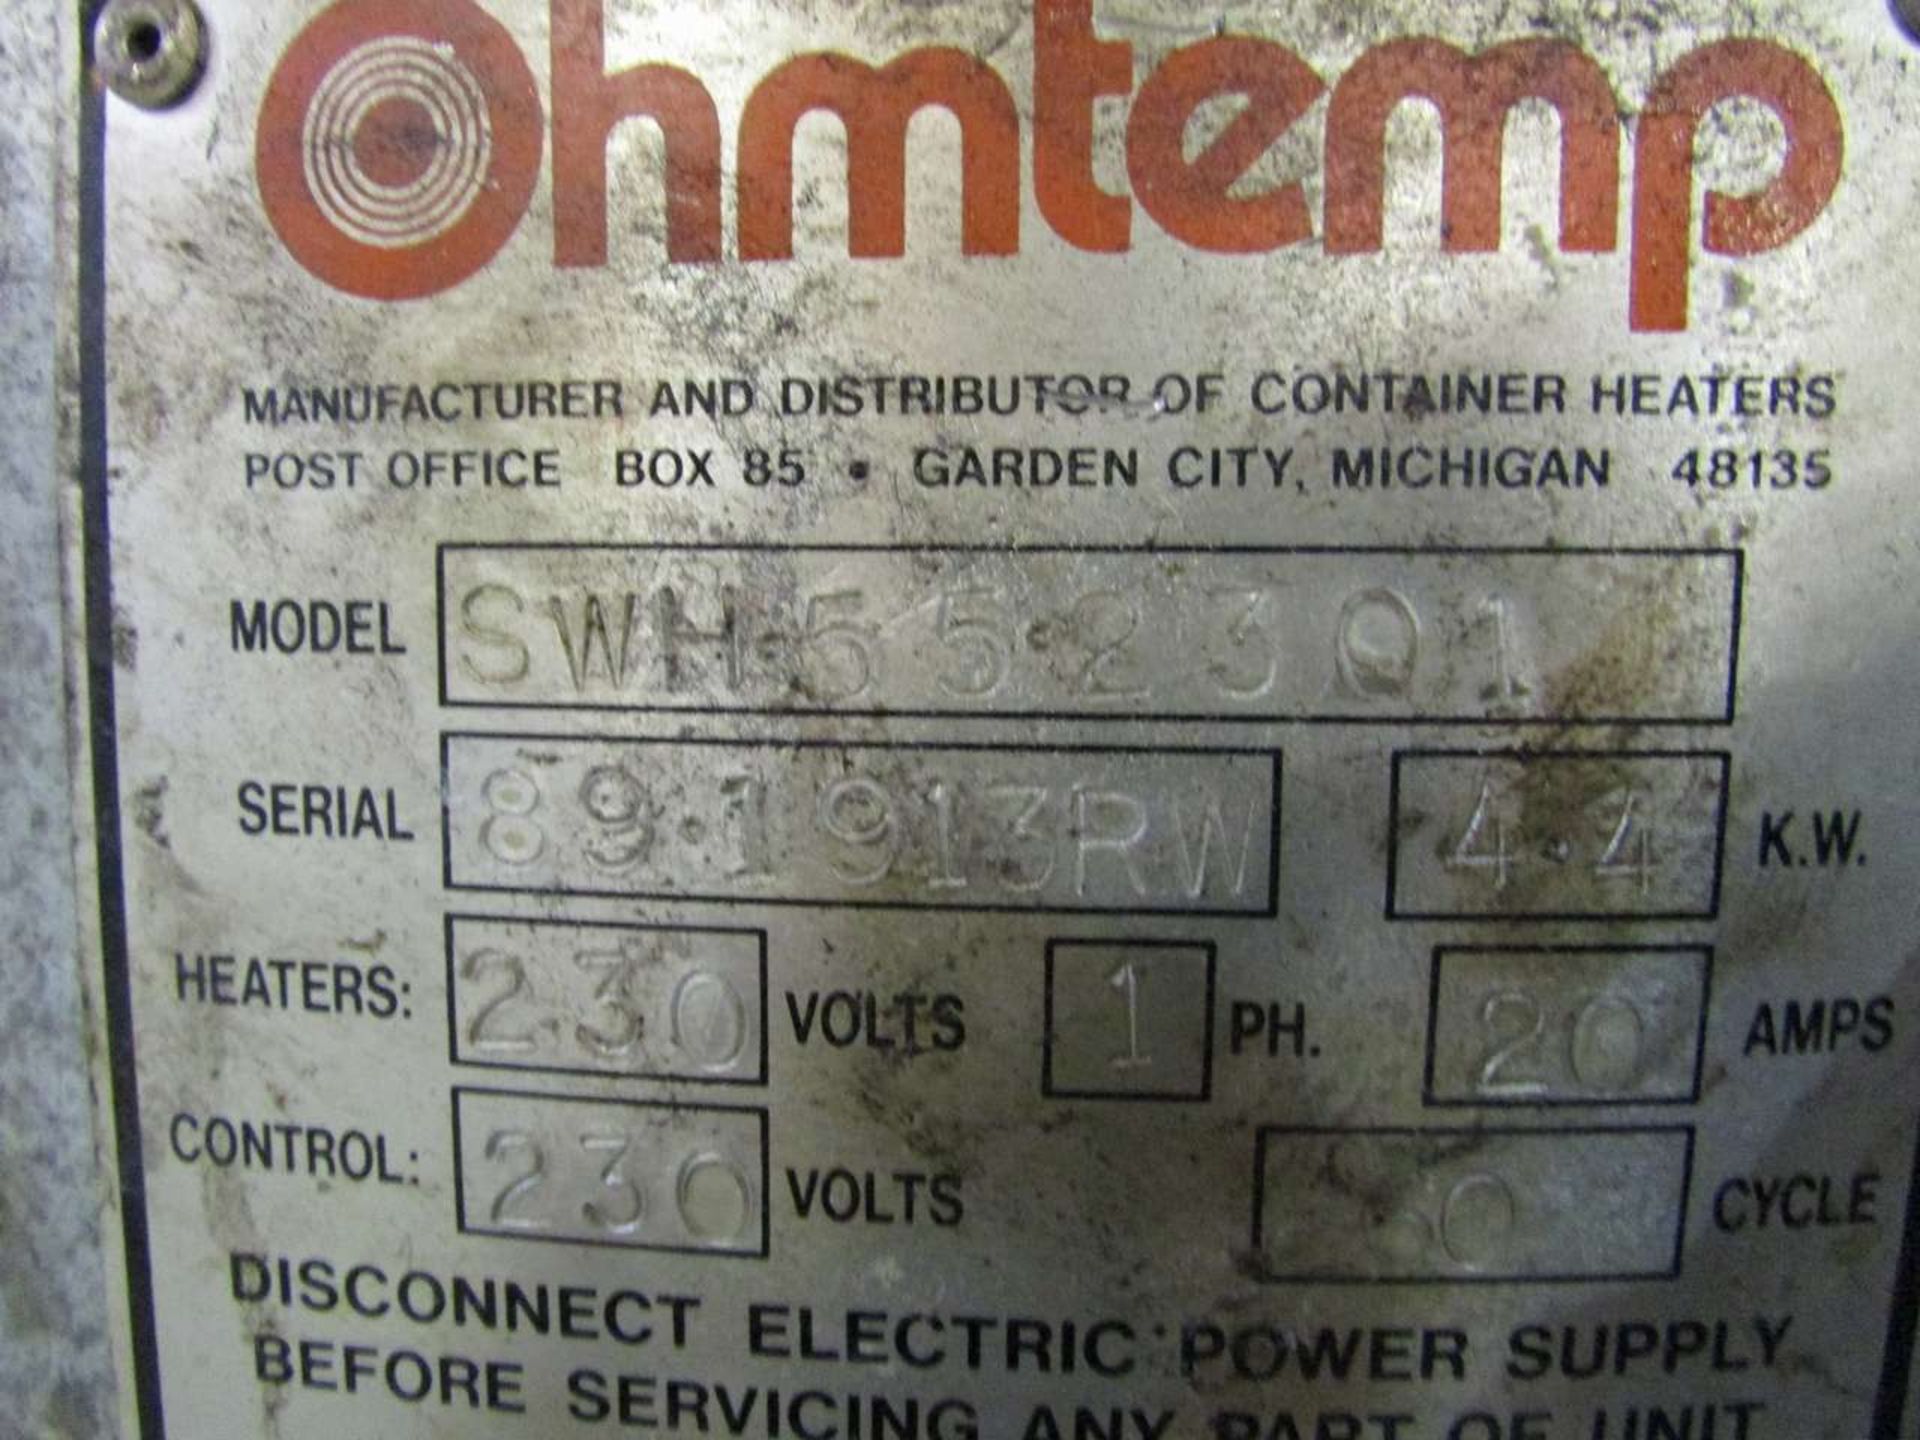 Ohmtemp SWH-55-2301 Electric 55 Gal Barrel Heater - Image 3 of 3